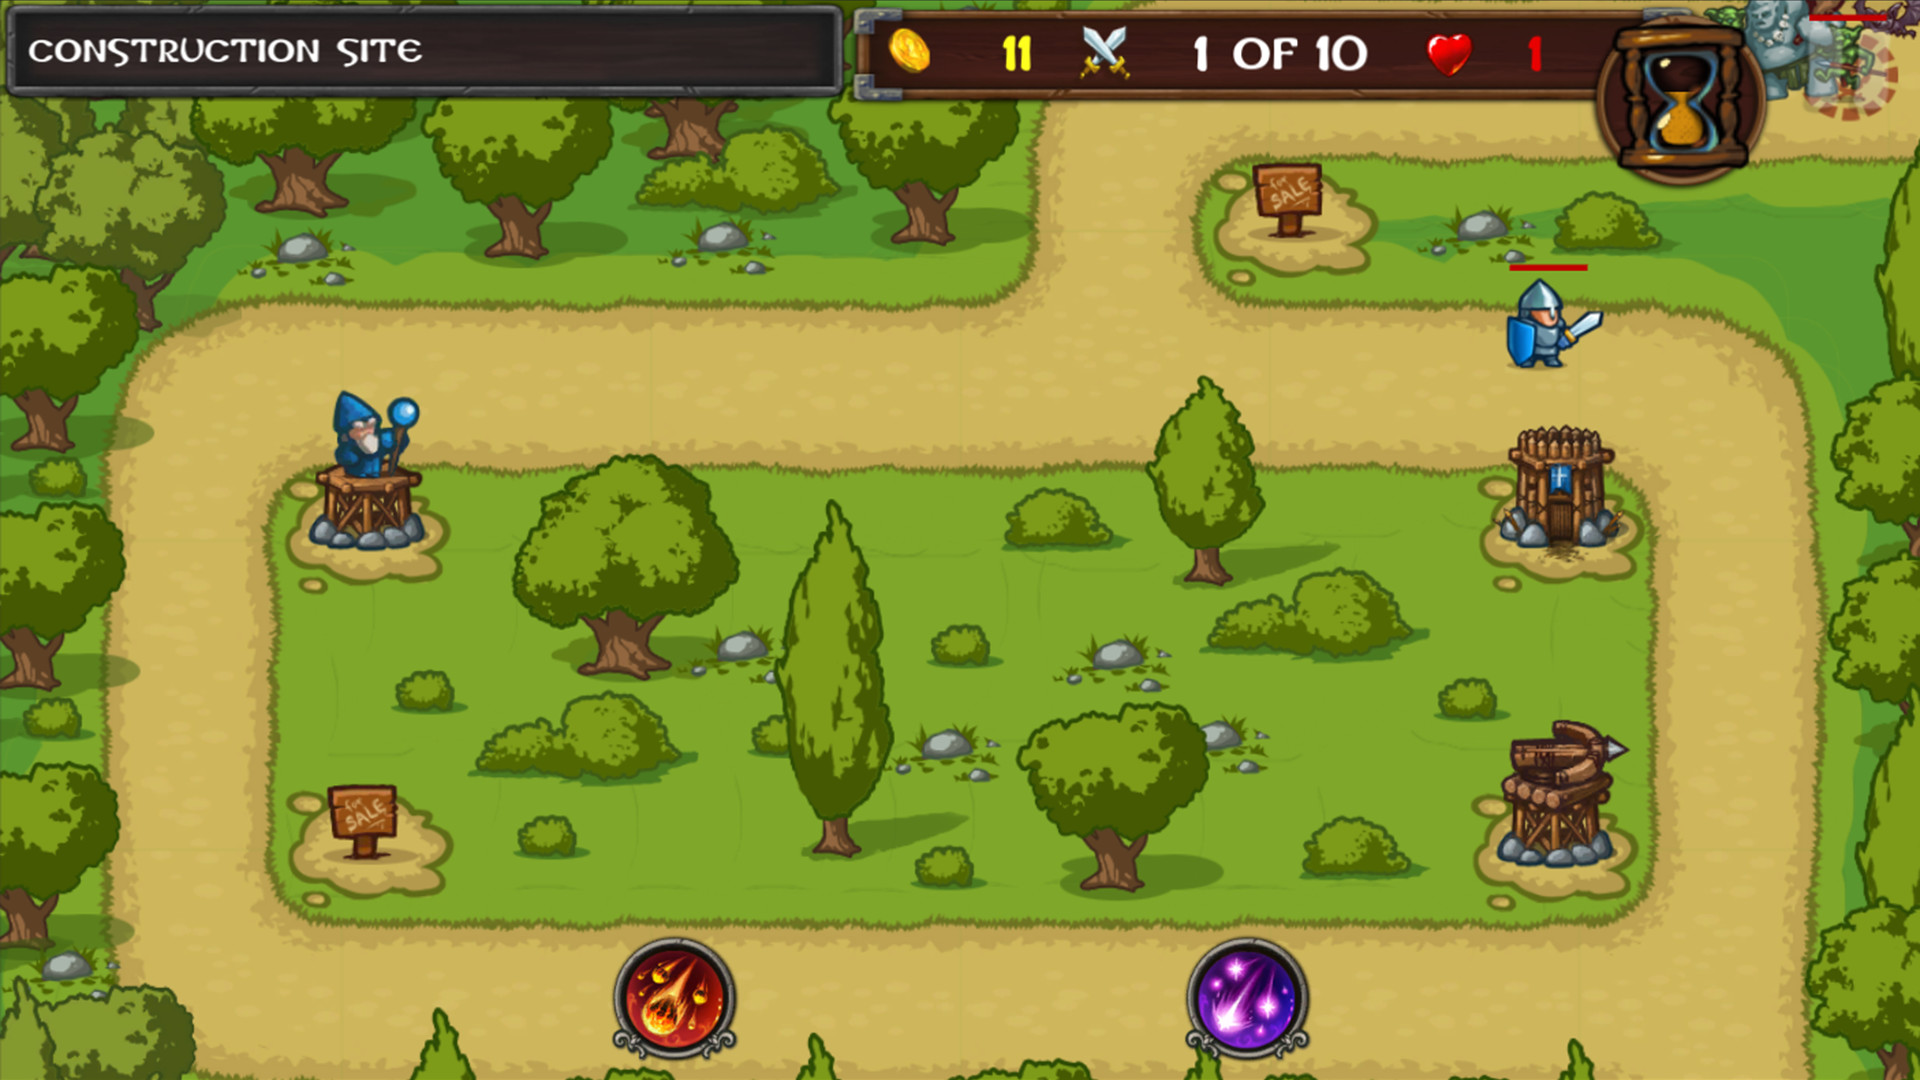 Tower Defense 2D Game - Play Online